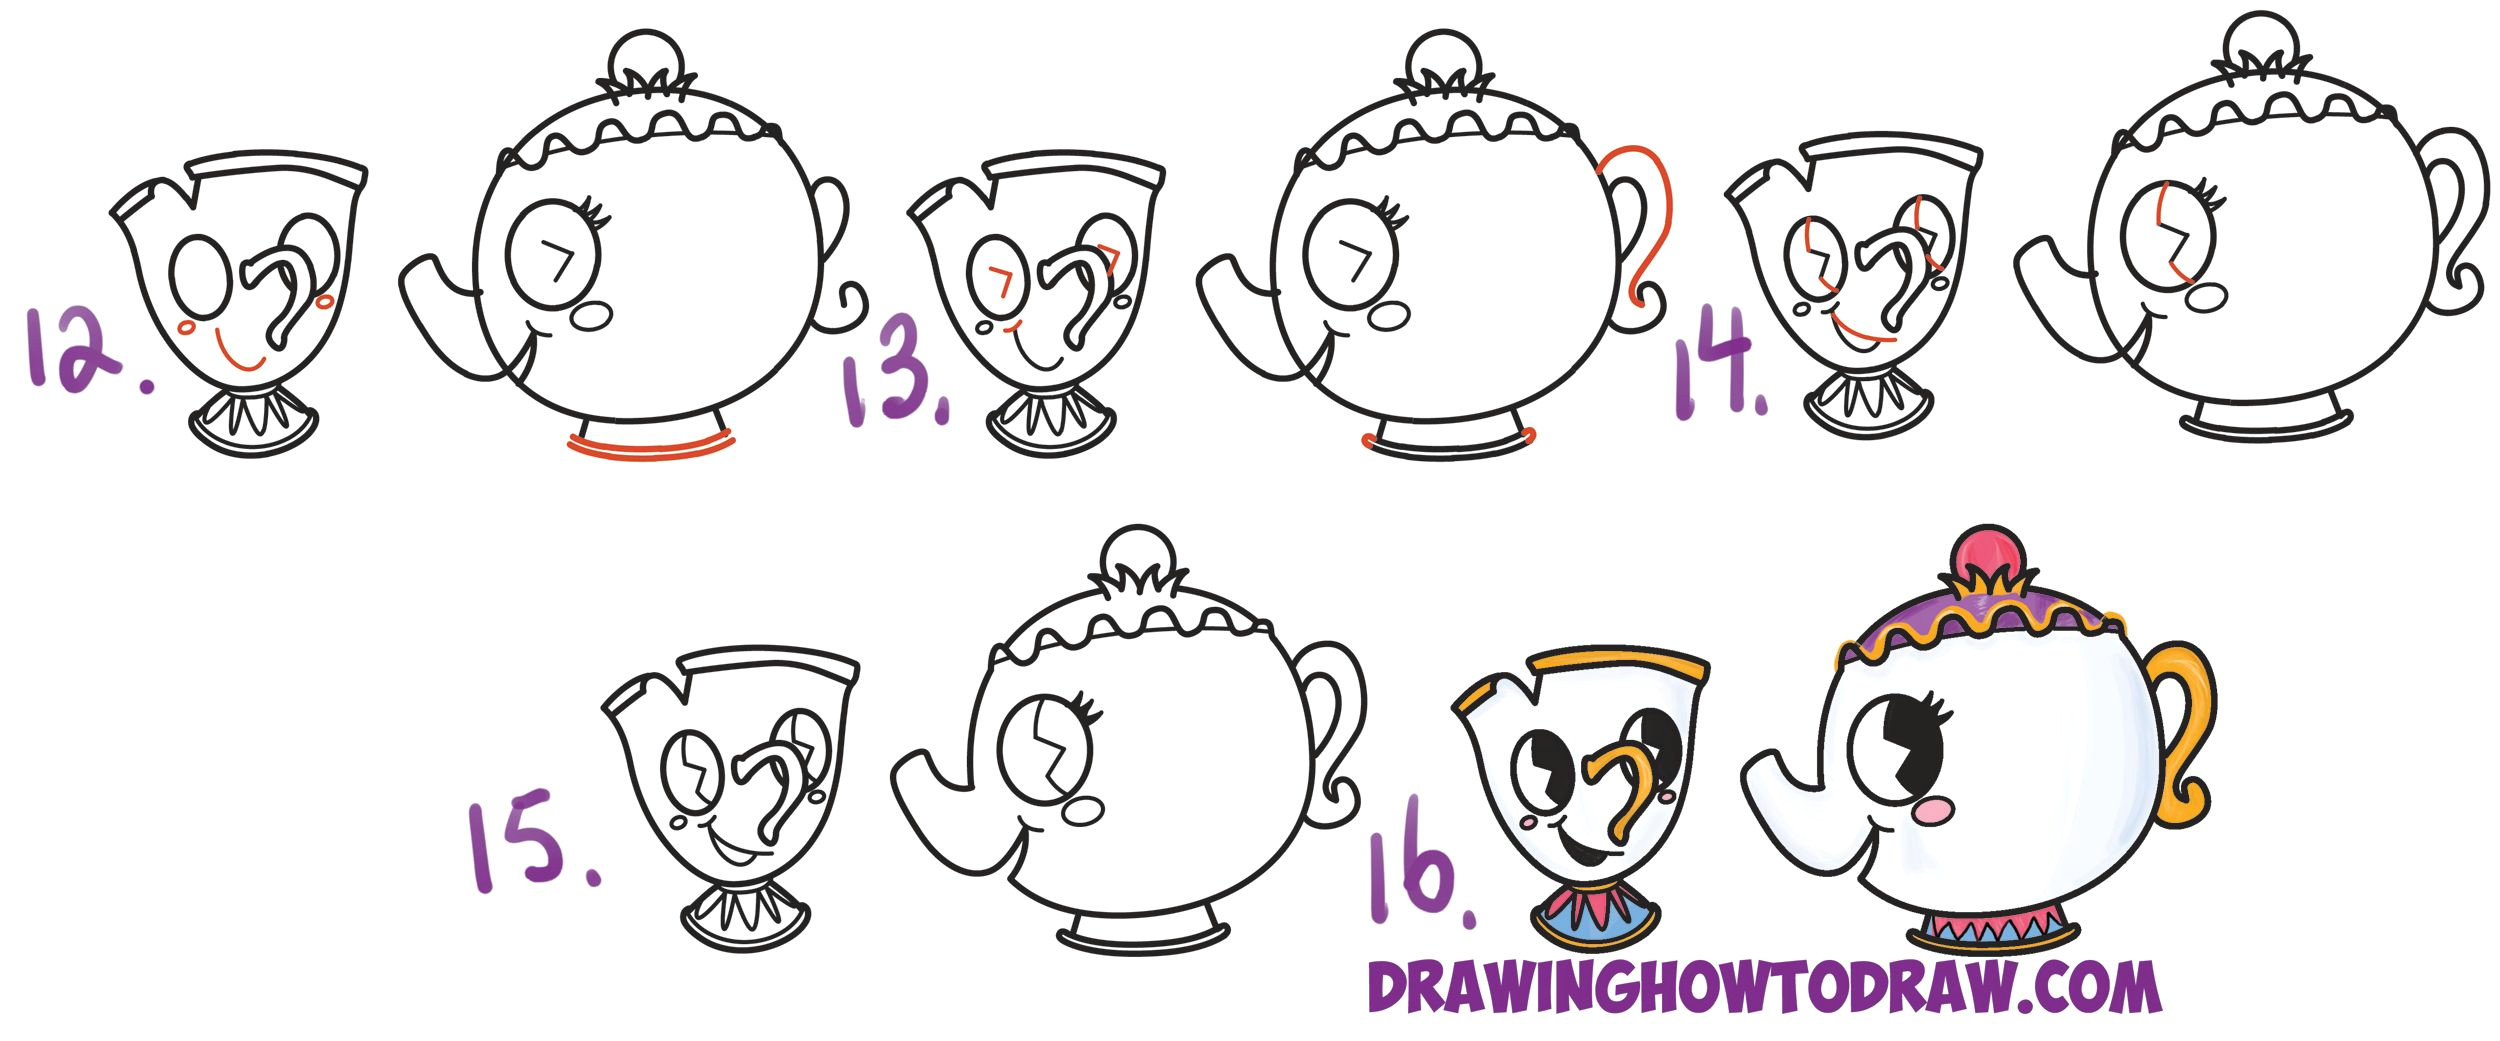 Easy Drawings Marvel How to Draw Cute Kawaii Chibi Mrs Potts and Chip From Beauty and